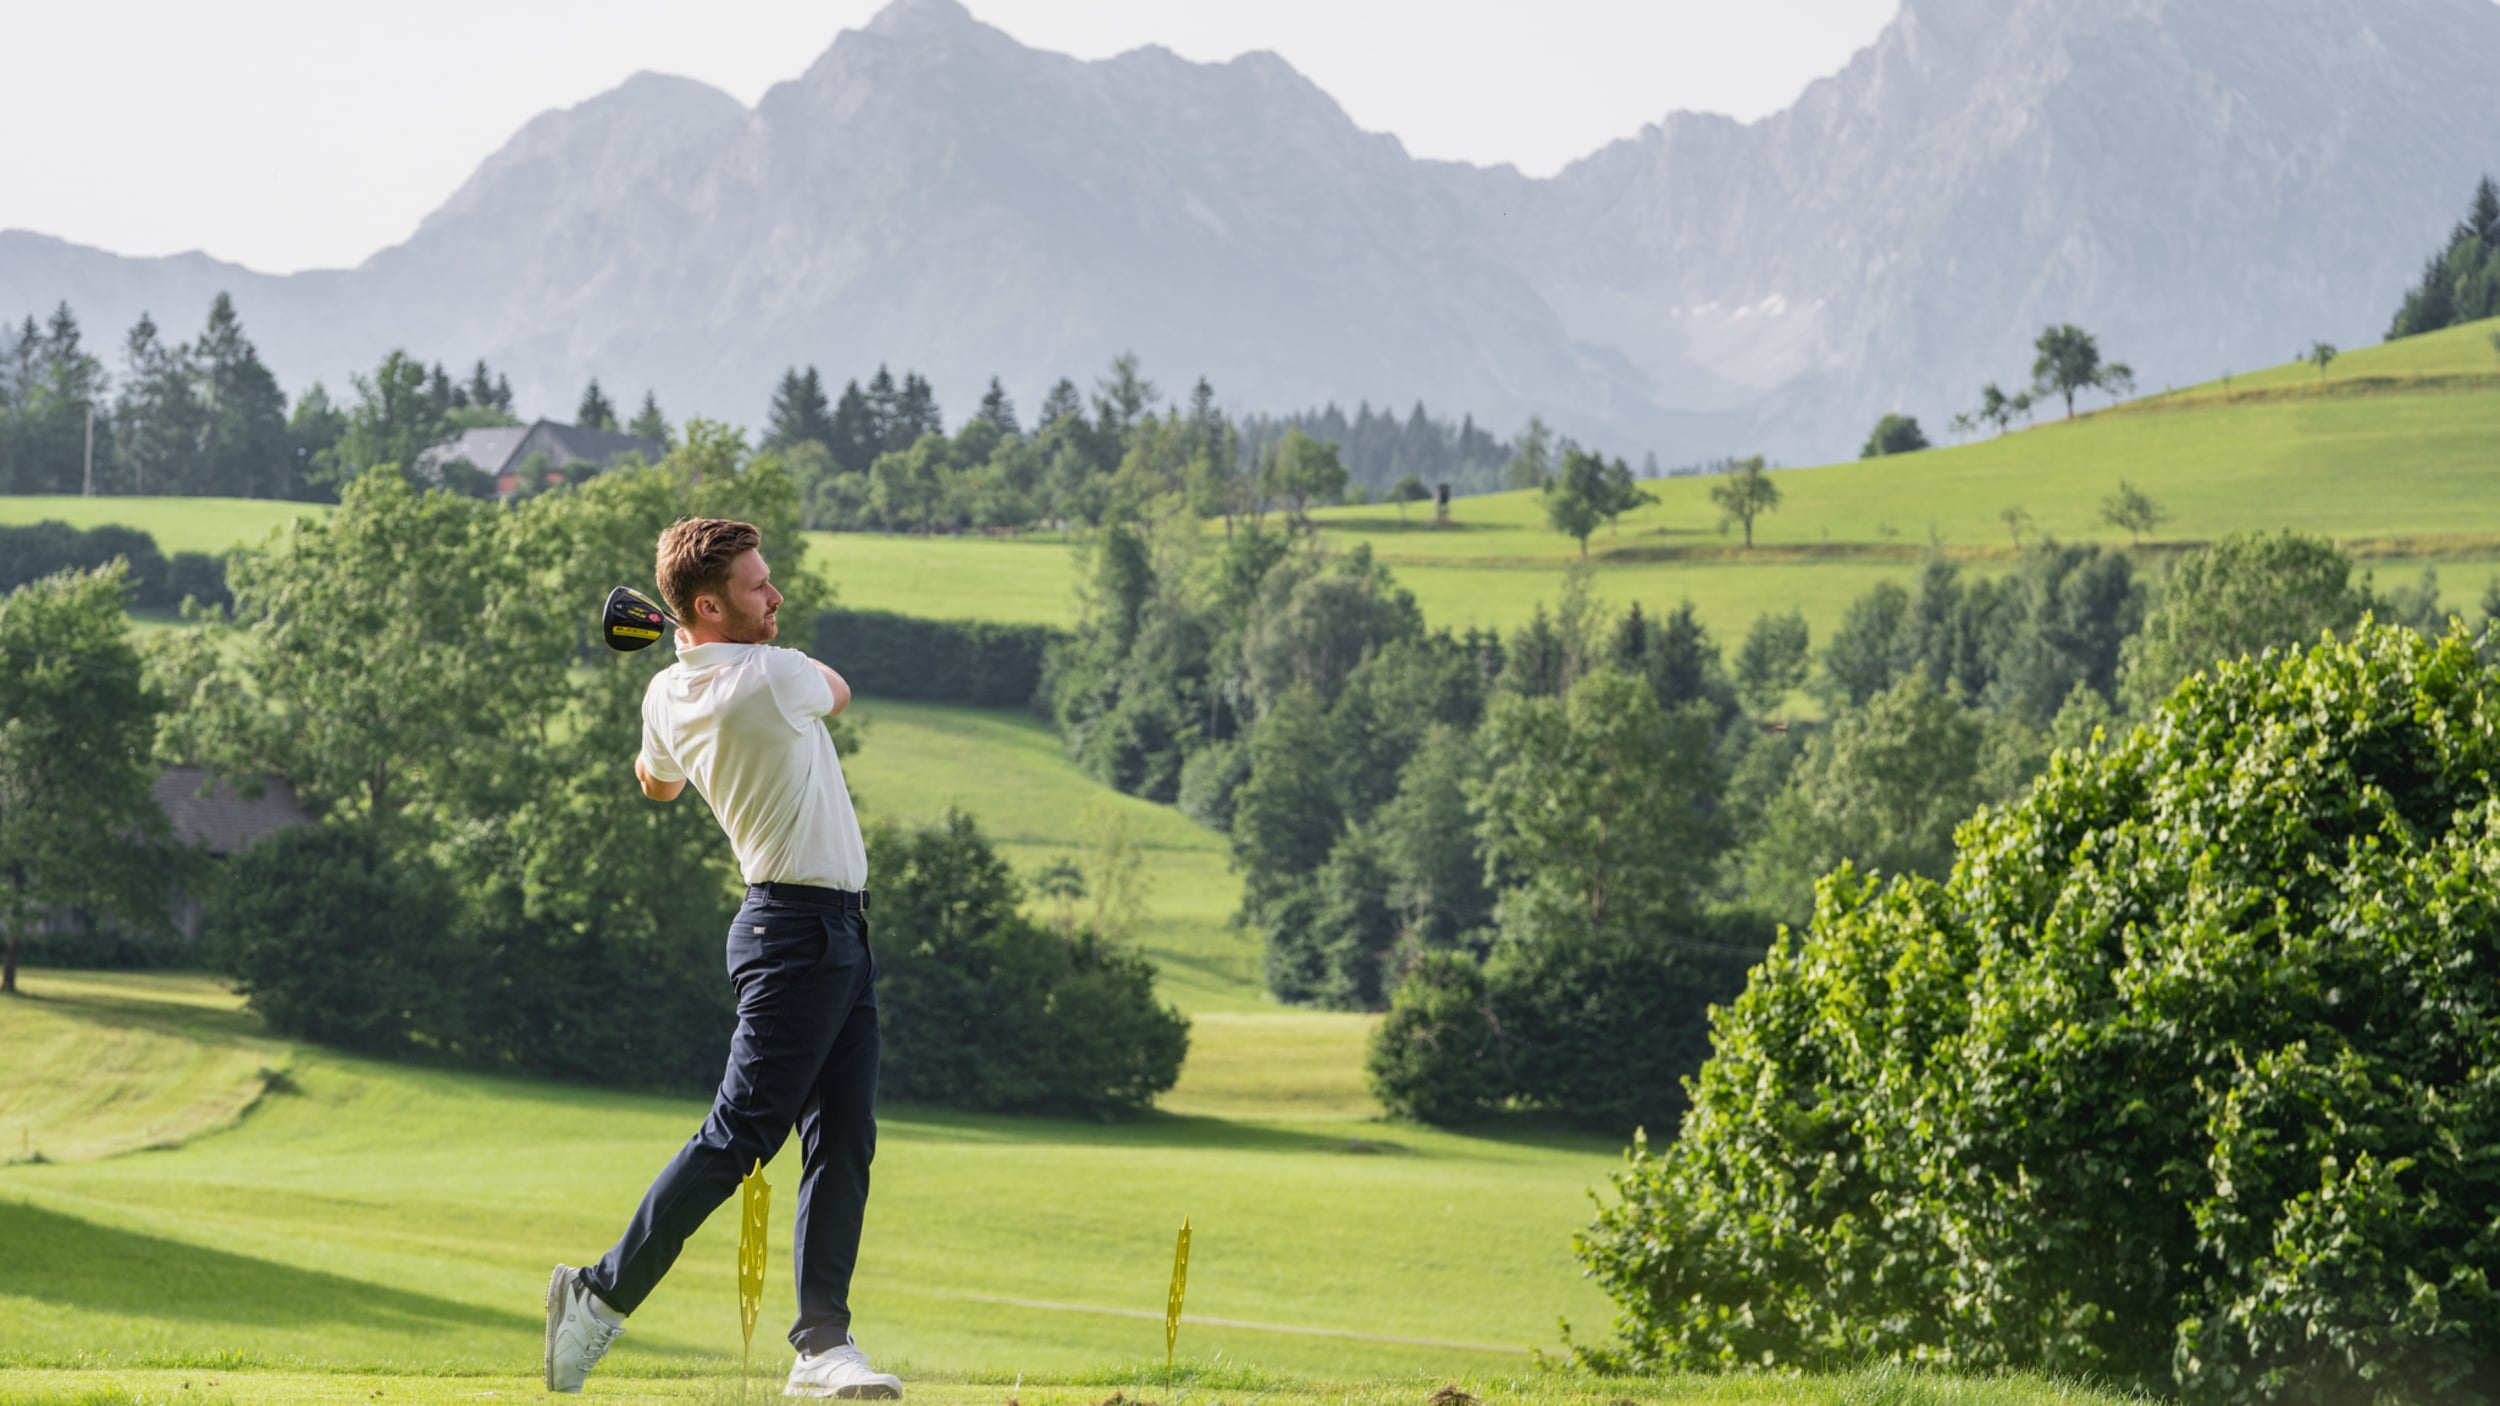 Golfers teeing off on the golf course with mountain views in Windischgarsten